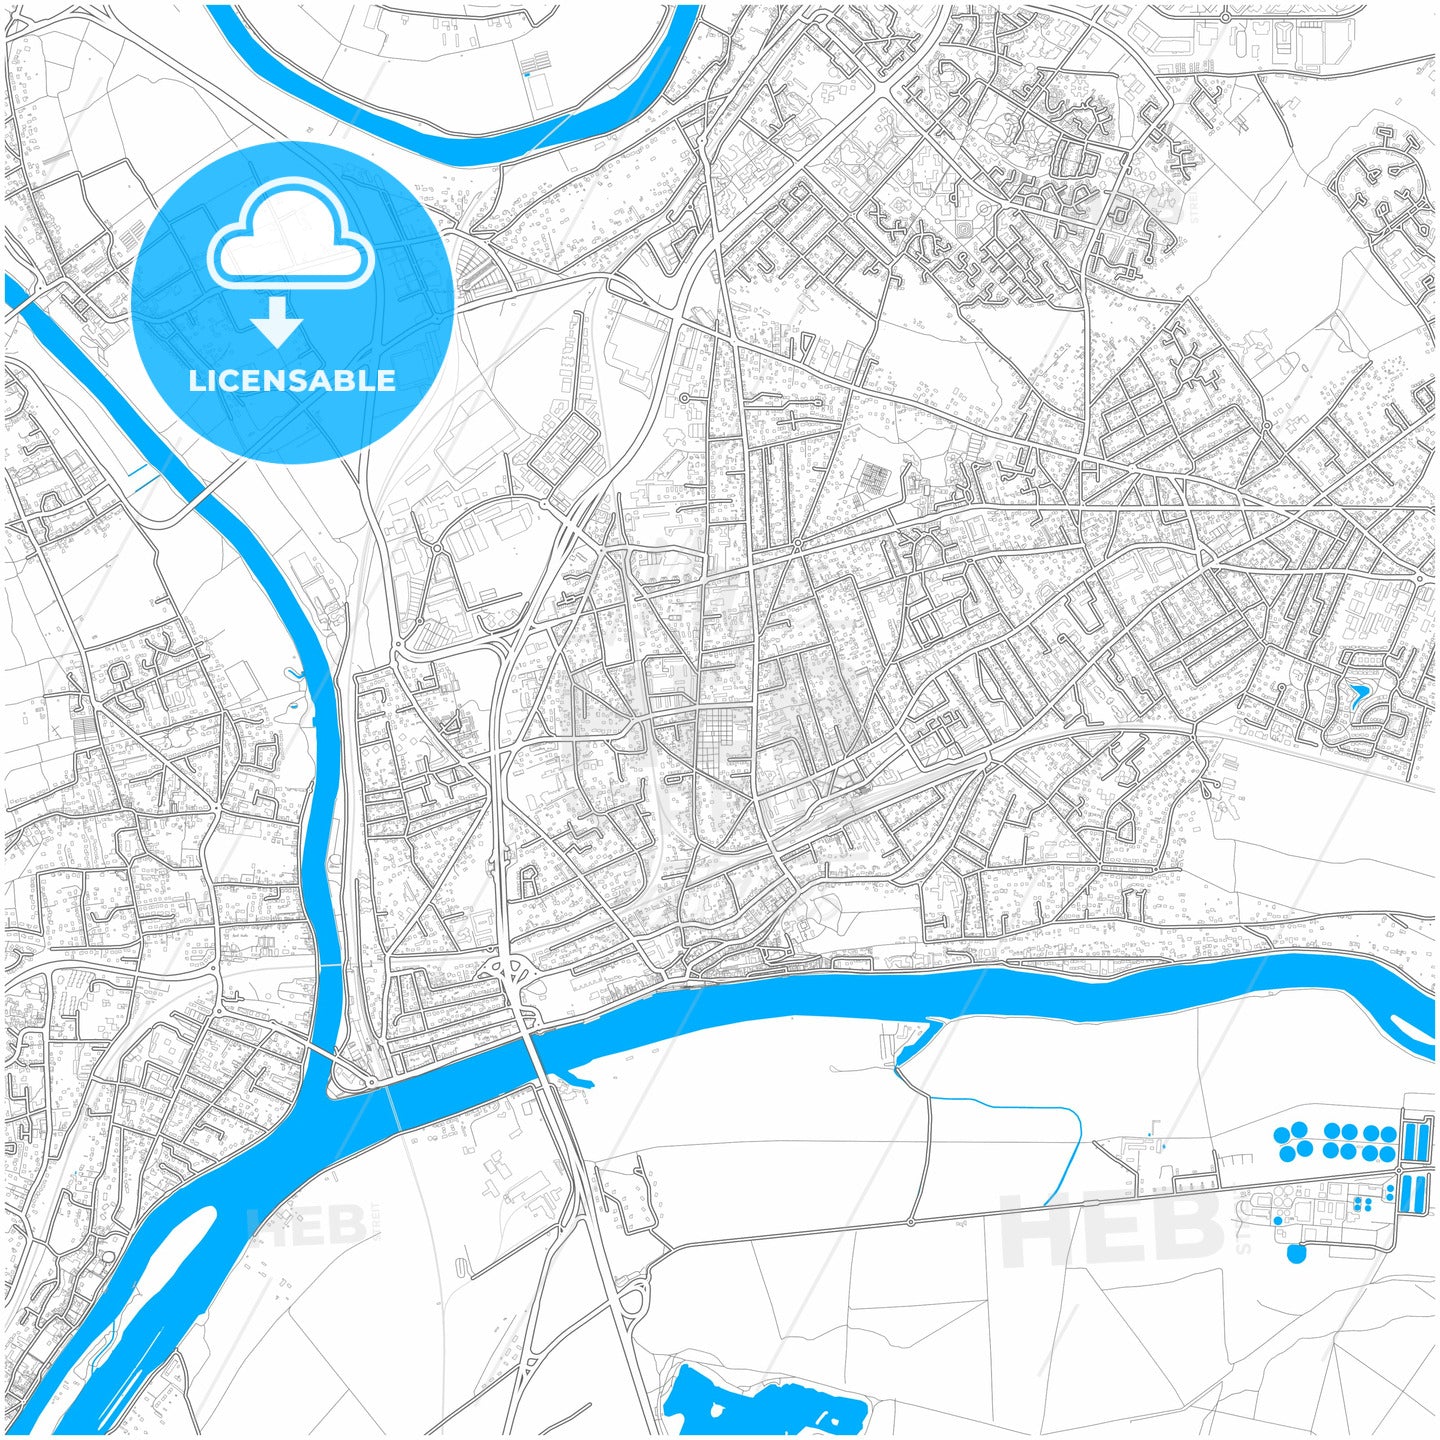 Conflans-Sainte-Honorine, Yvelines, France, city map with high quality roads.